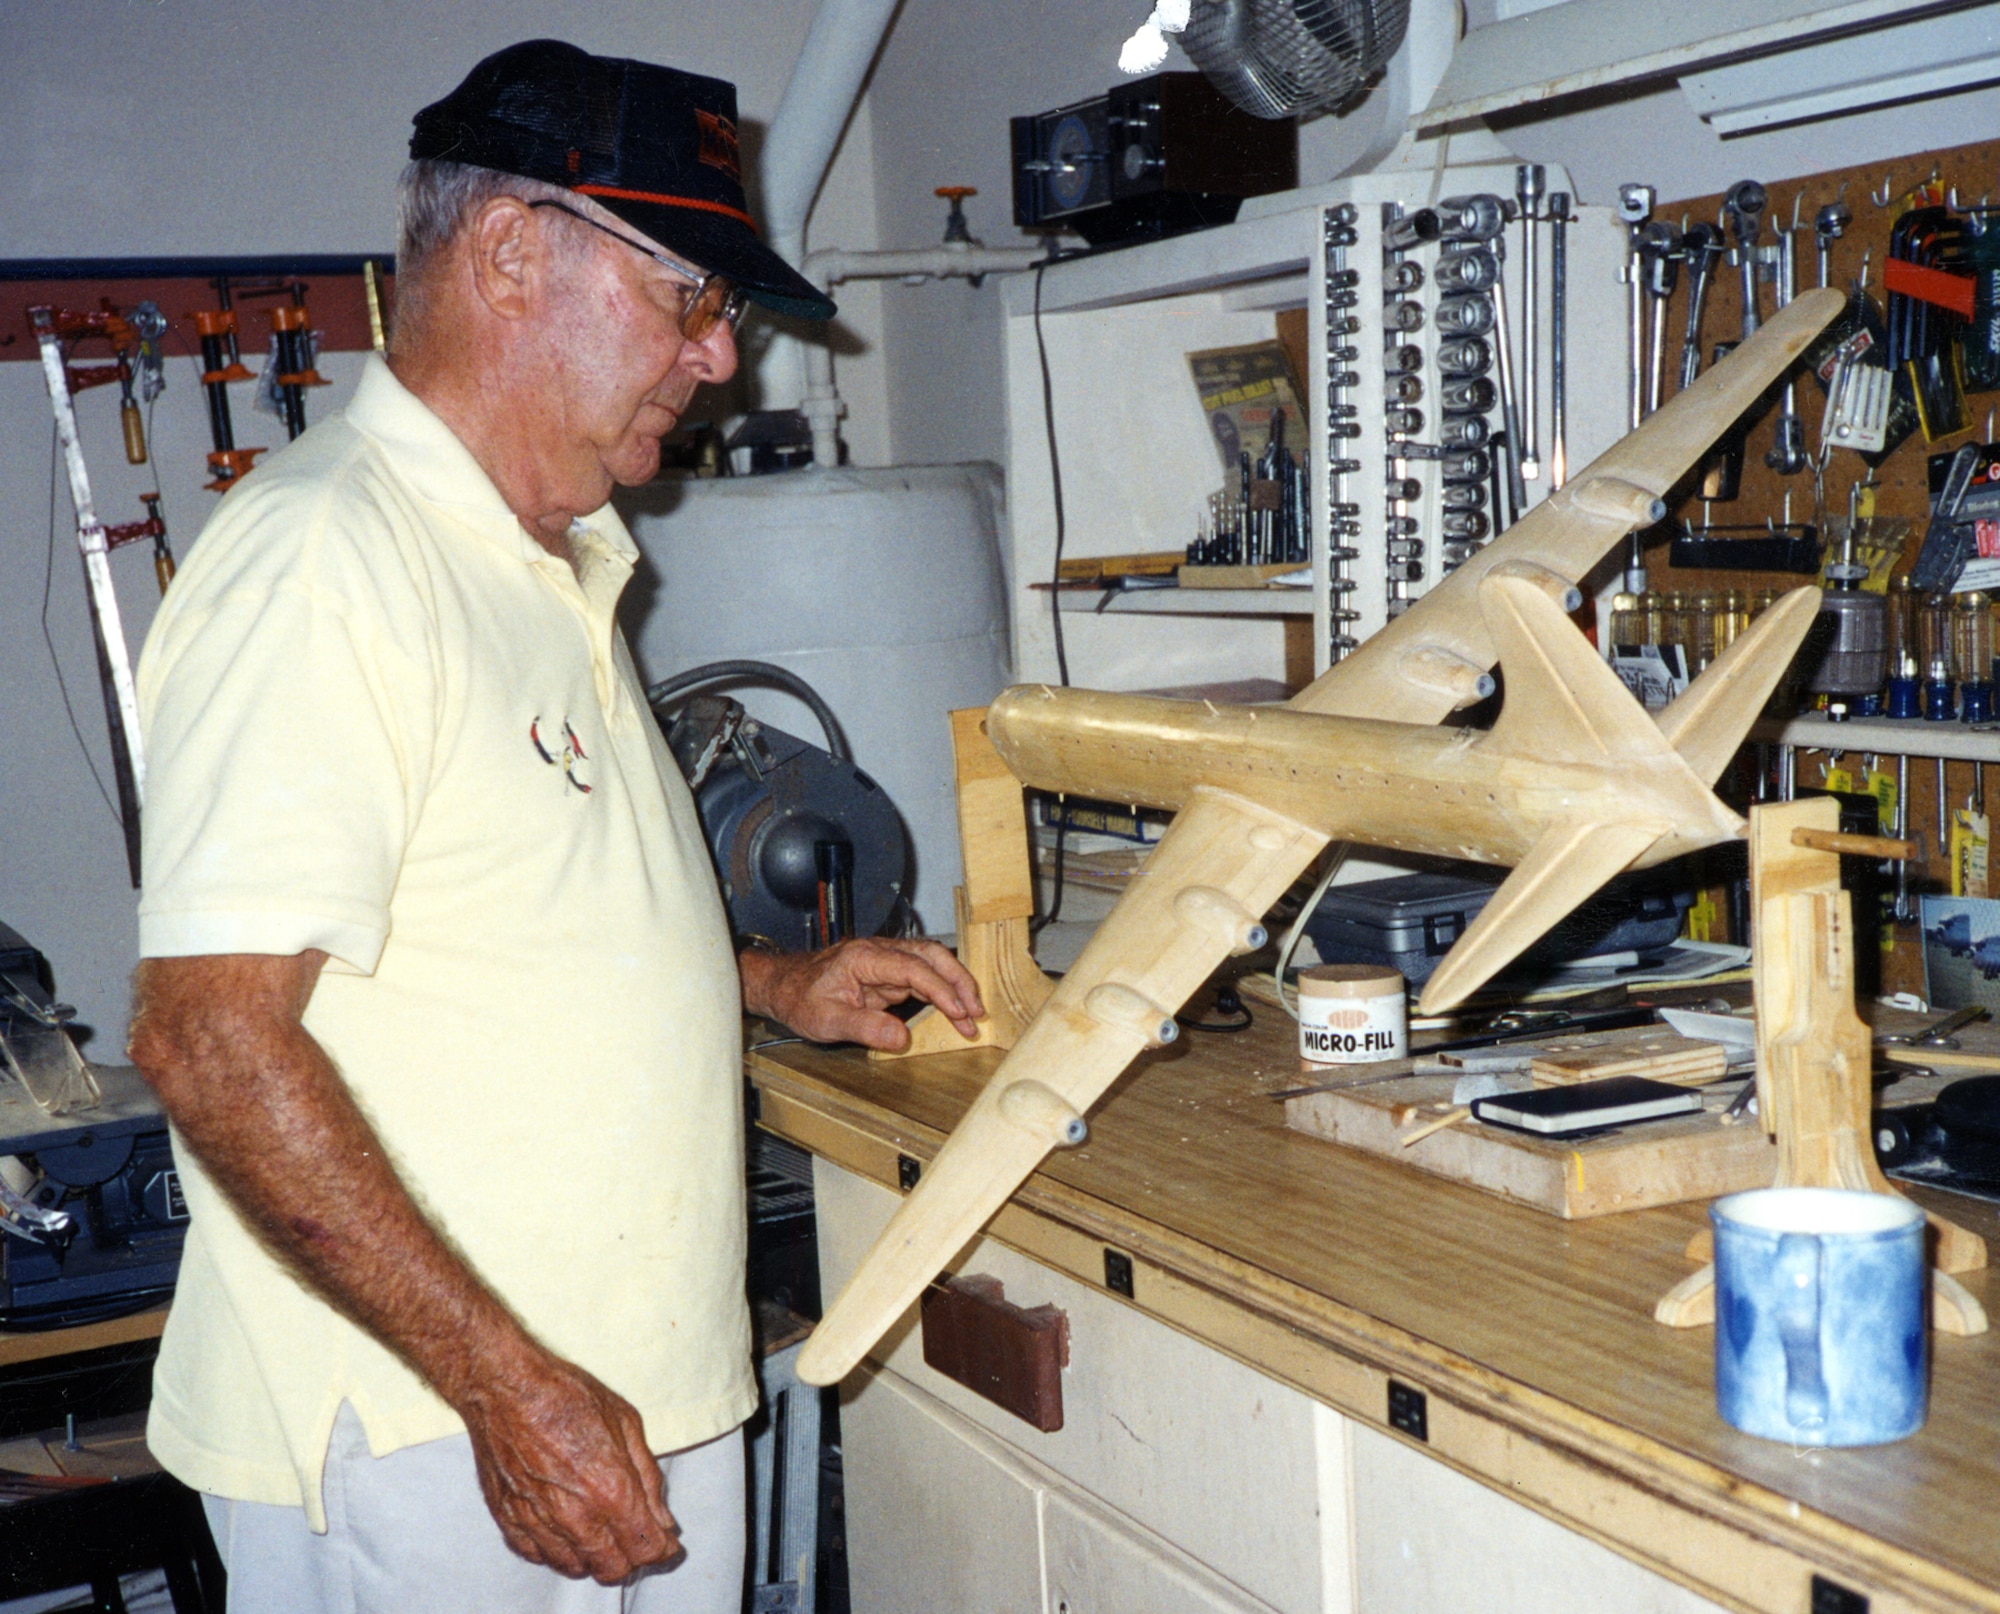 Using measurements taken from the original aircraft and photographs, Lt. Col. Howard T. Meek (USAF, Ret) constructed this 1/72 scale model of the XC-99 from scratch using various types of wood. (U.S. Air Force photo).